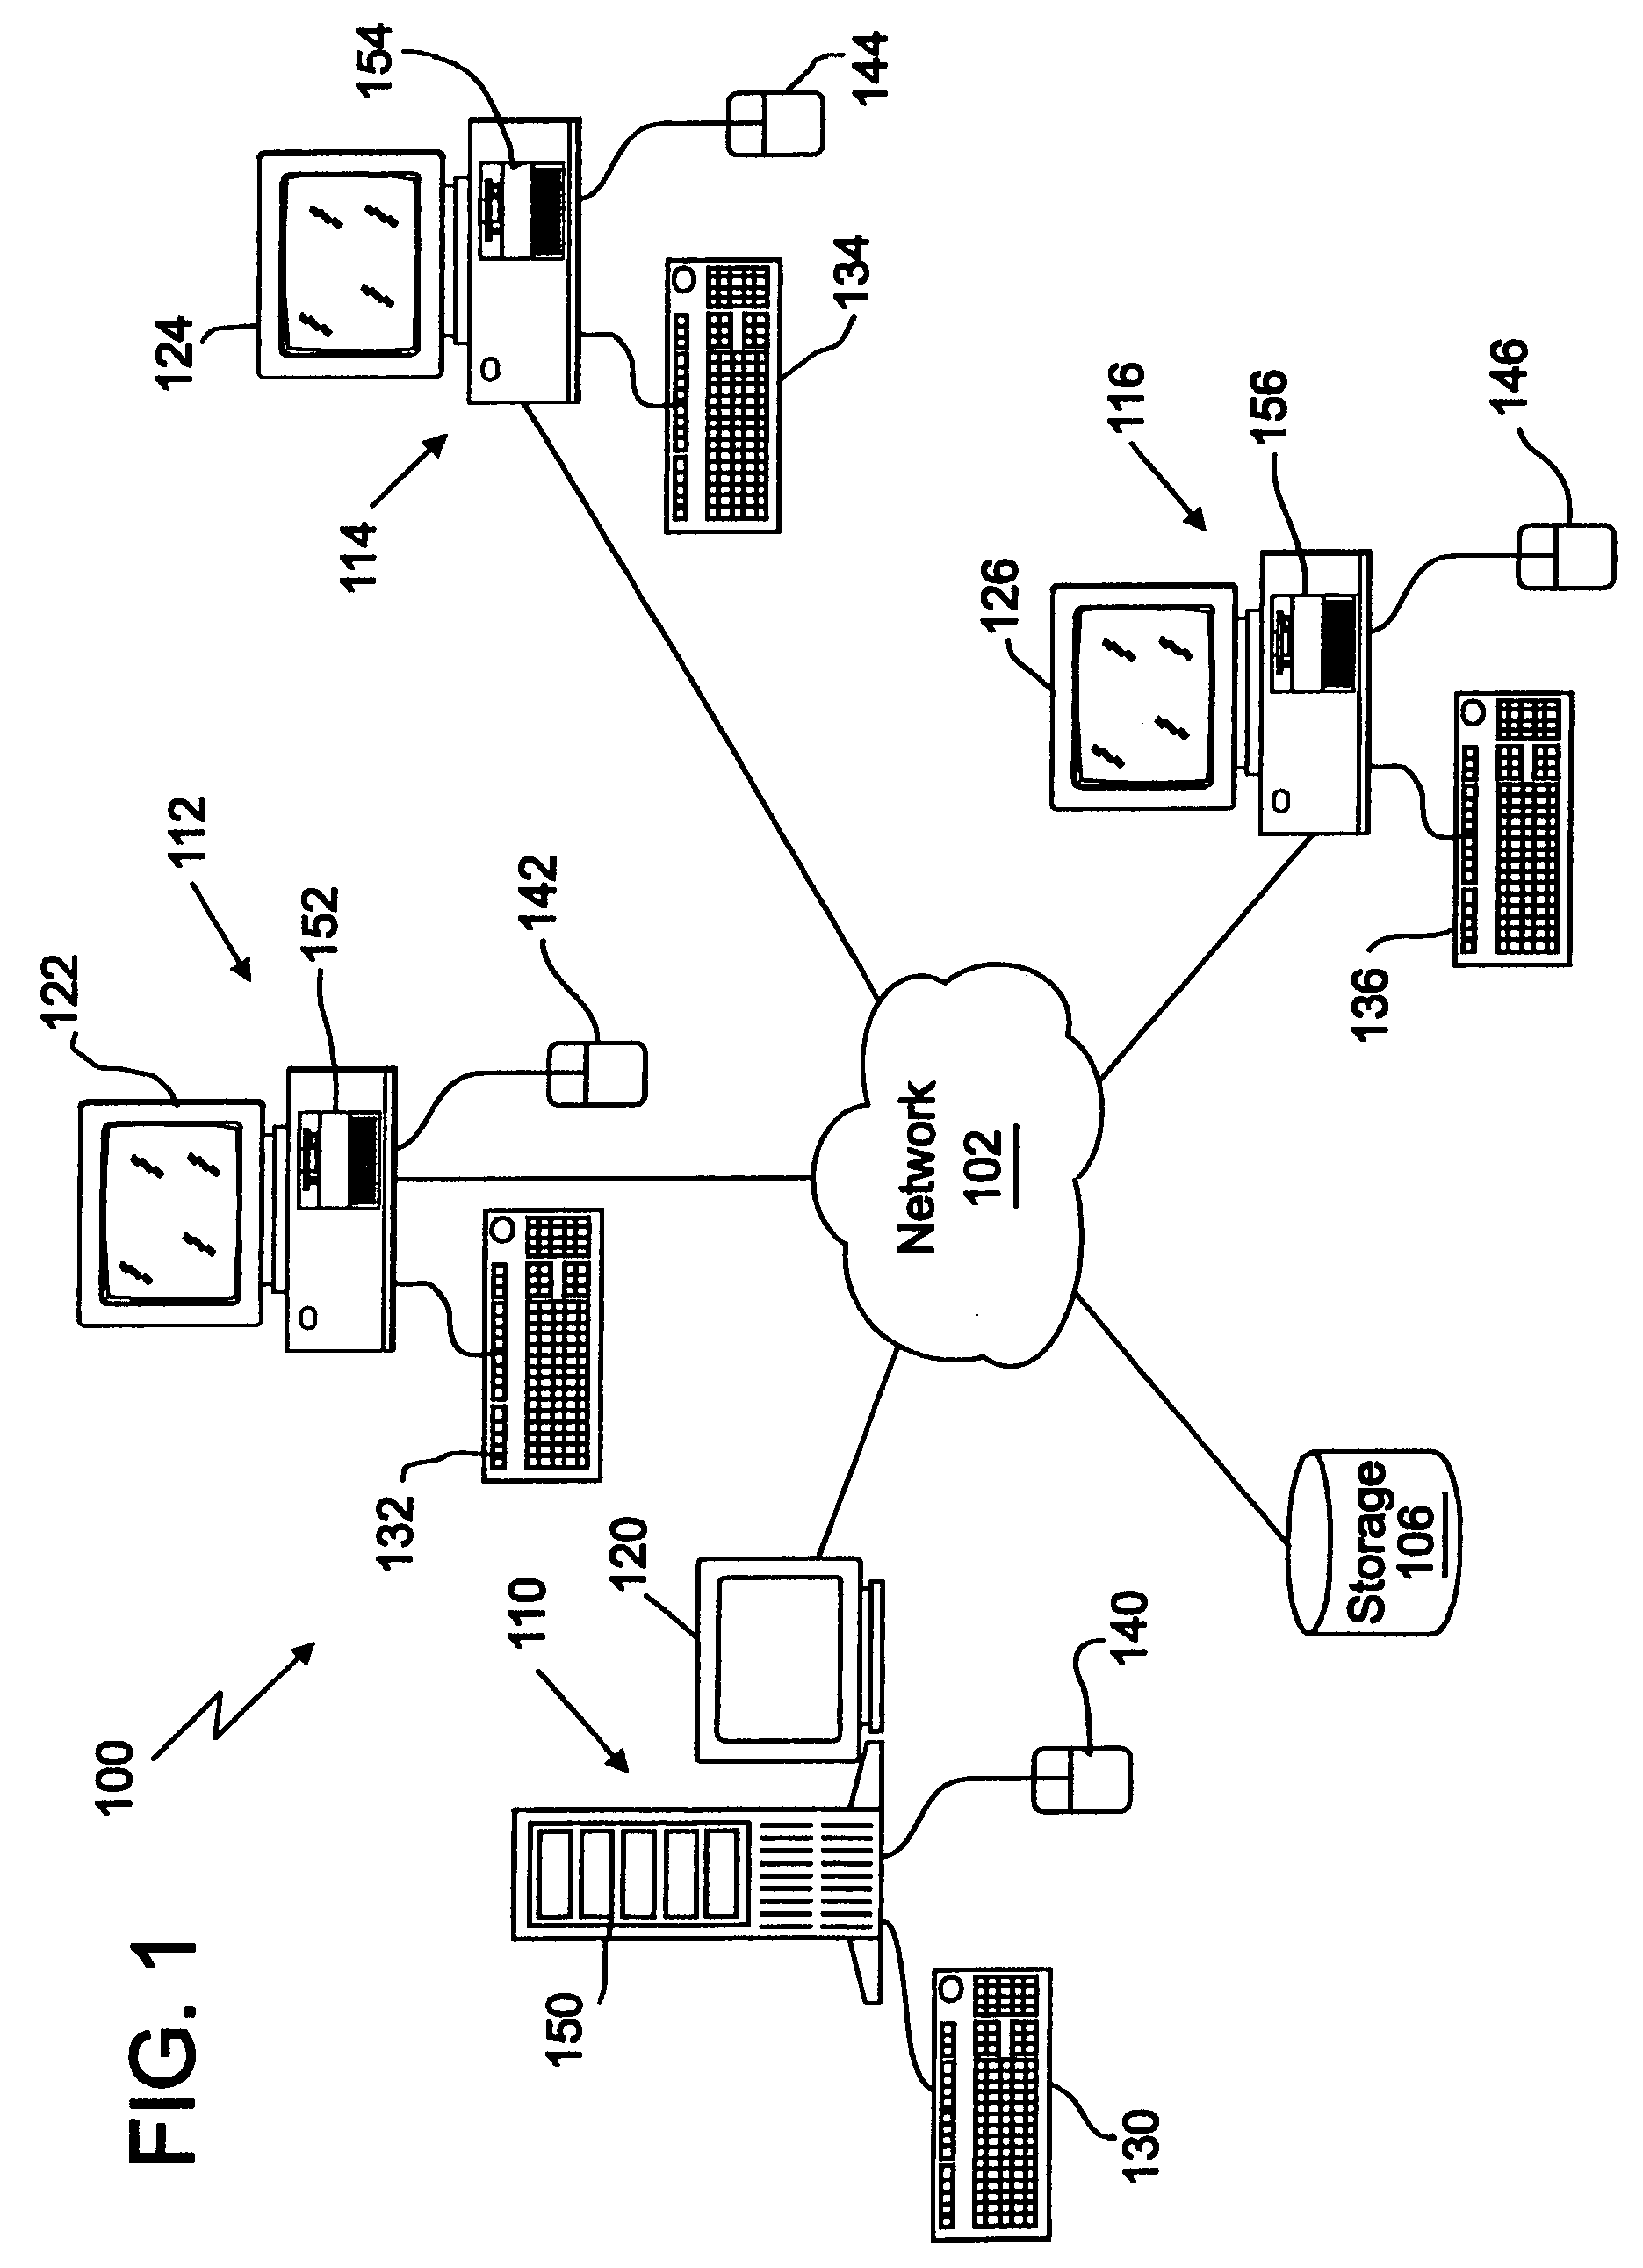 System and method to enhance instant messaging